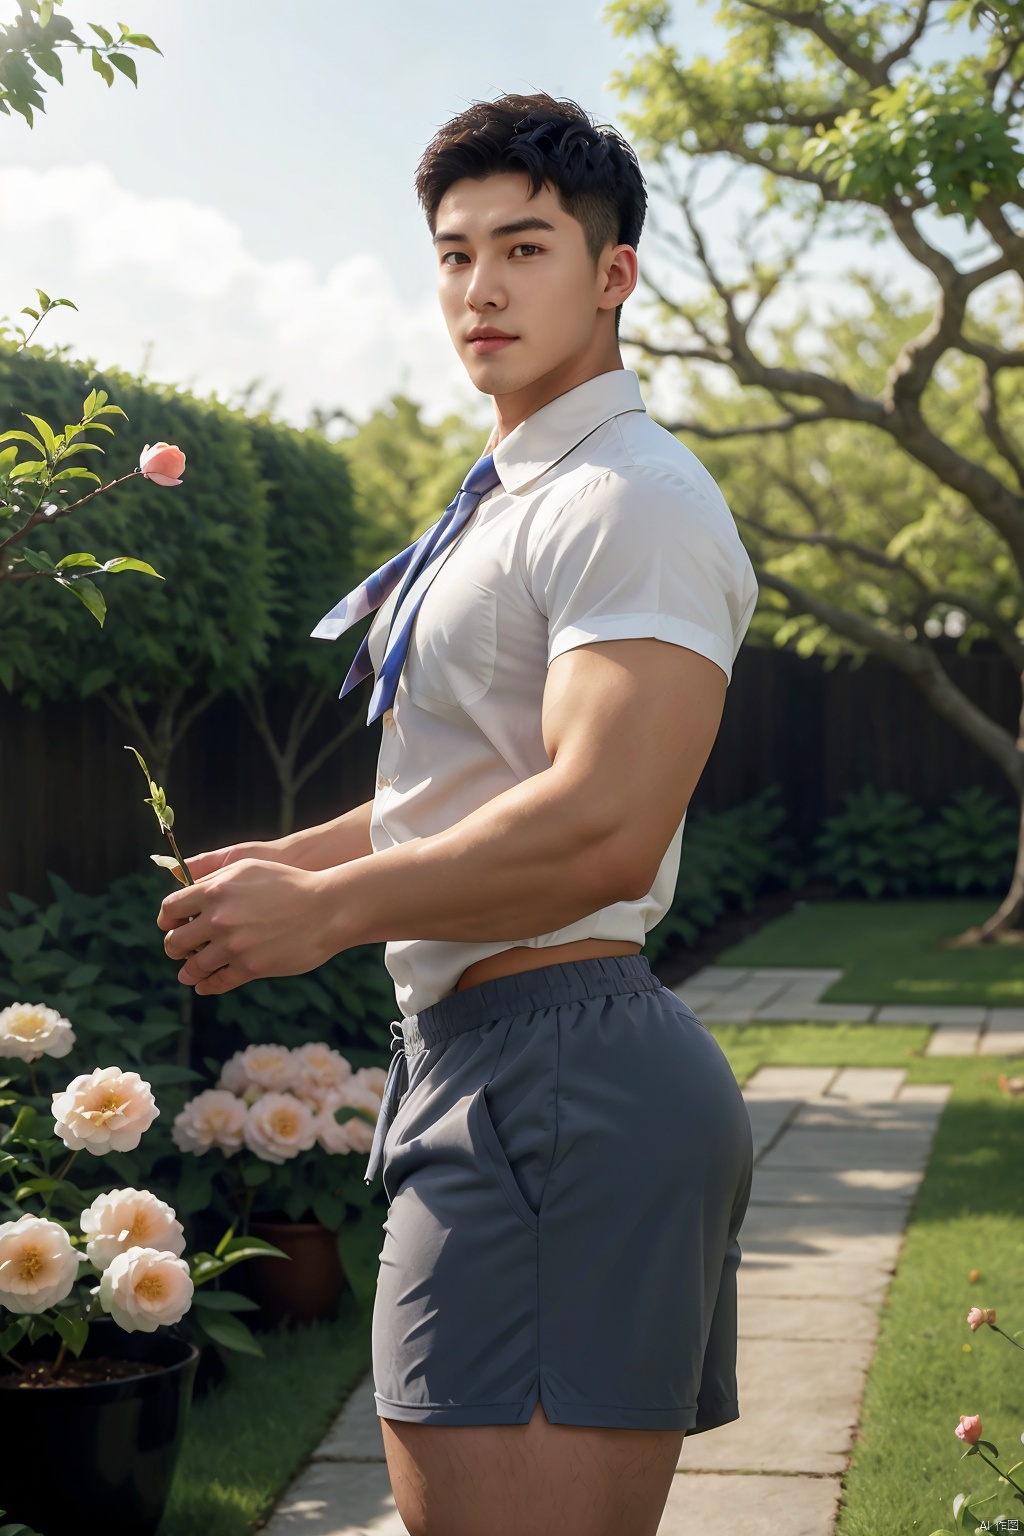  masterpiece,1 boy,Young,Handsome,Look at me,Short hair,Tea hair,Students,White shirt,Striped tie,Gray shorts,Stand,Outdoor,Garden,Peach tree,Flying petals,Light and shadow,HDR,textured skin,super detail,best quality, CodeMan001, SaSangAAA, Divine Titan